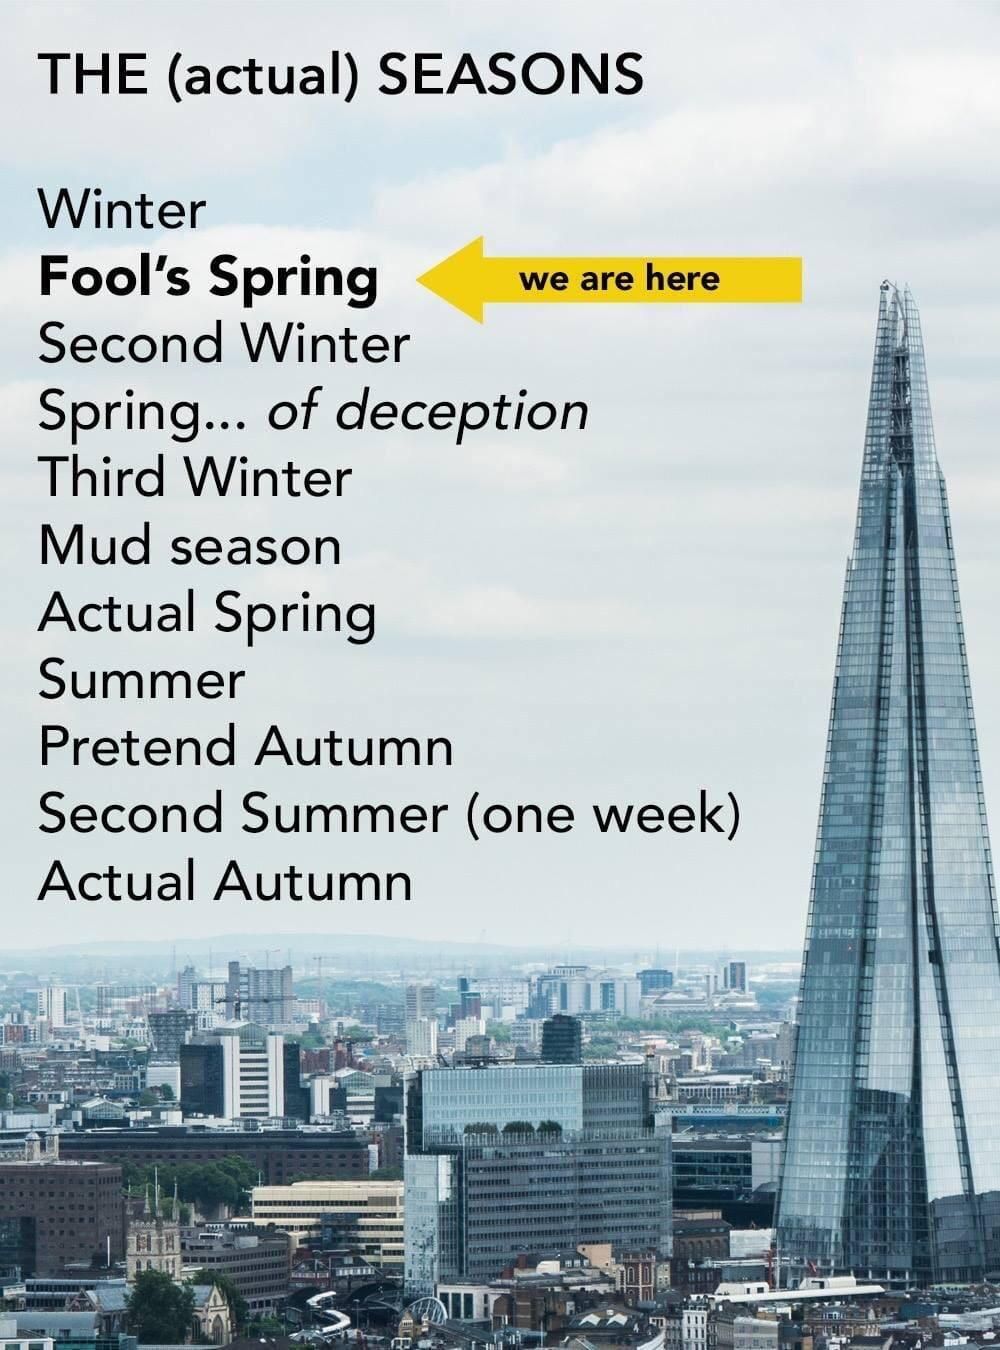 British seasons mirror the British spirit: overtly downcast with brief periods of false hope.